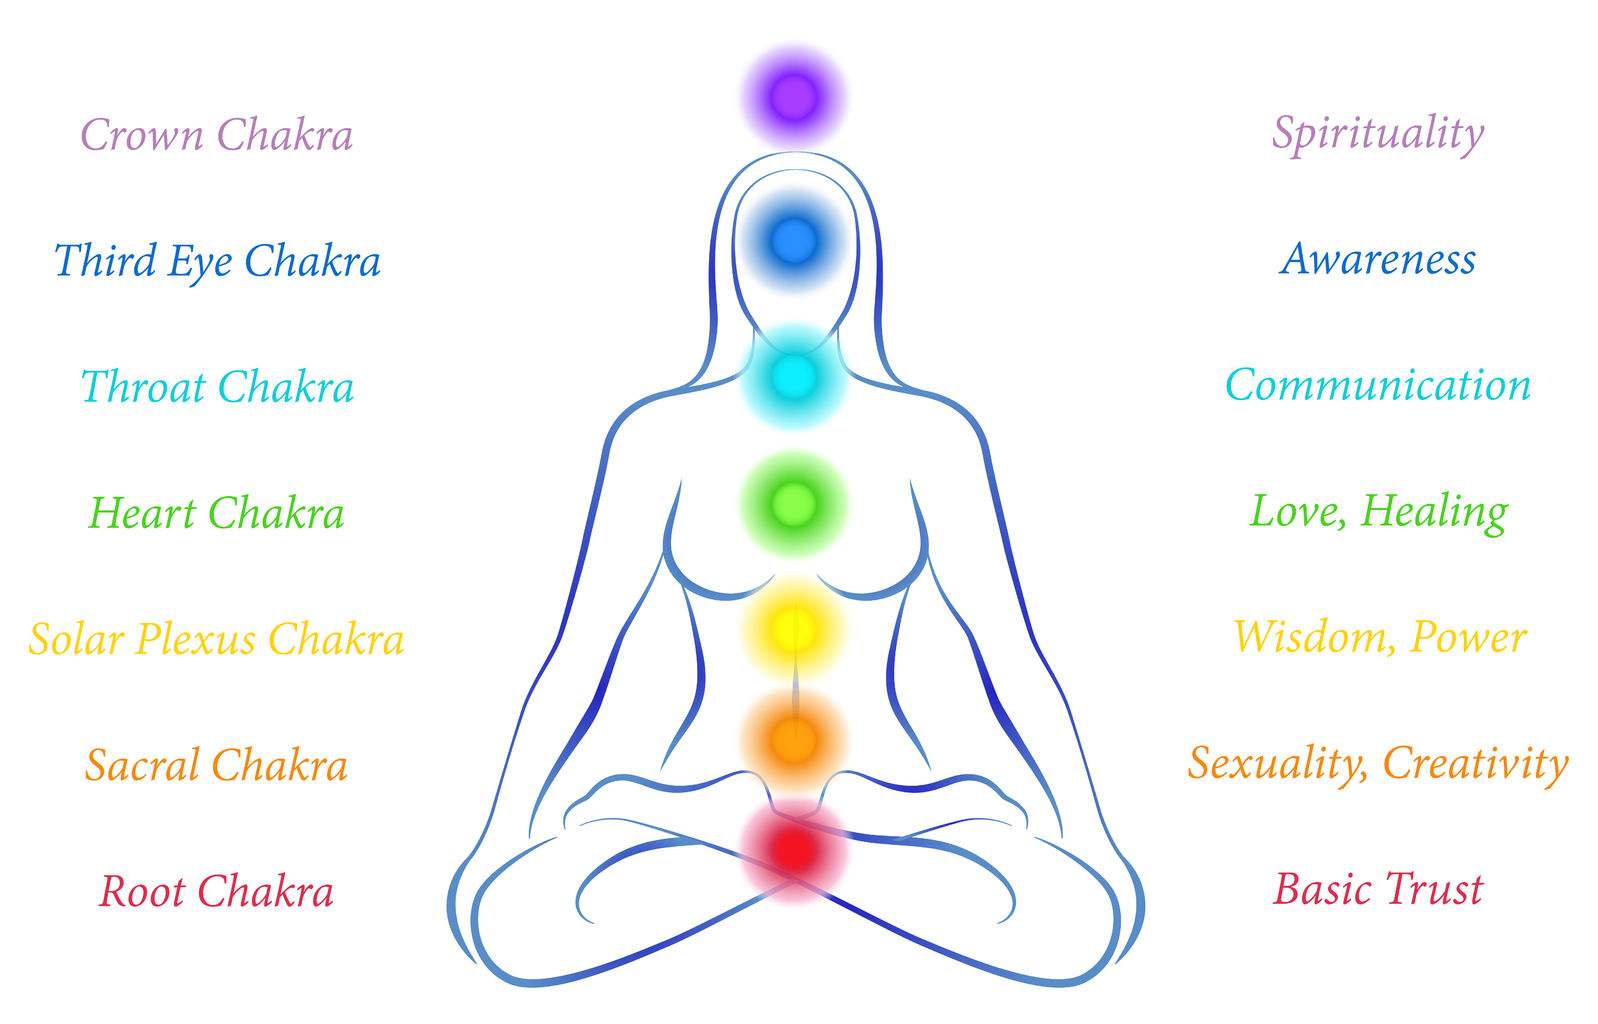 The energy fields of your chakras. https://www.info-on-high-blood-pressure.com/Chakras-And-High-Blood-Pressure.html